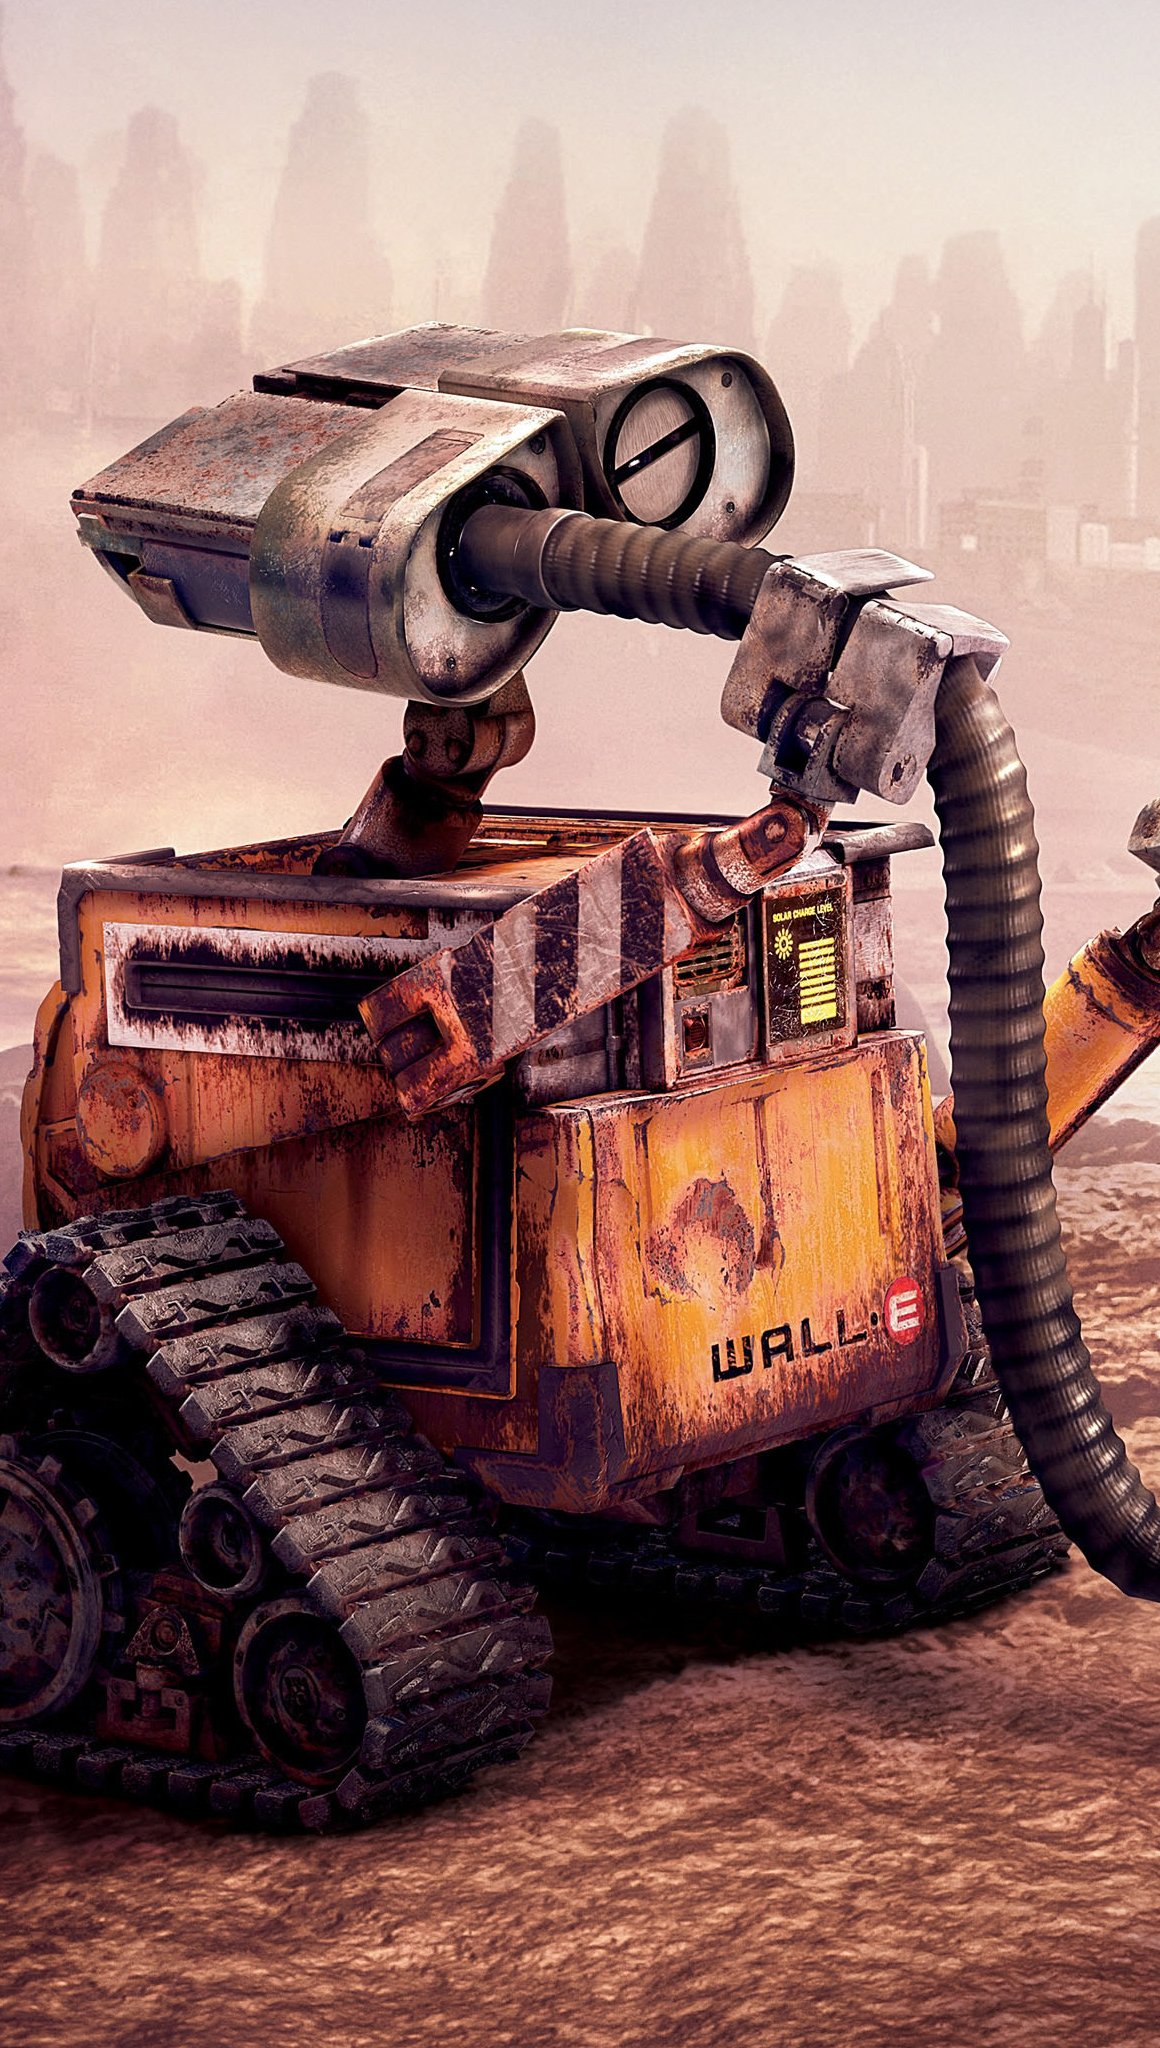 Wall-e with vacum cleaner Wallpaper ID:6613